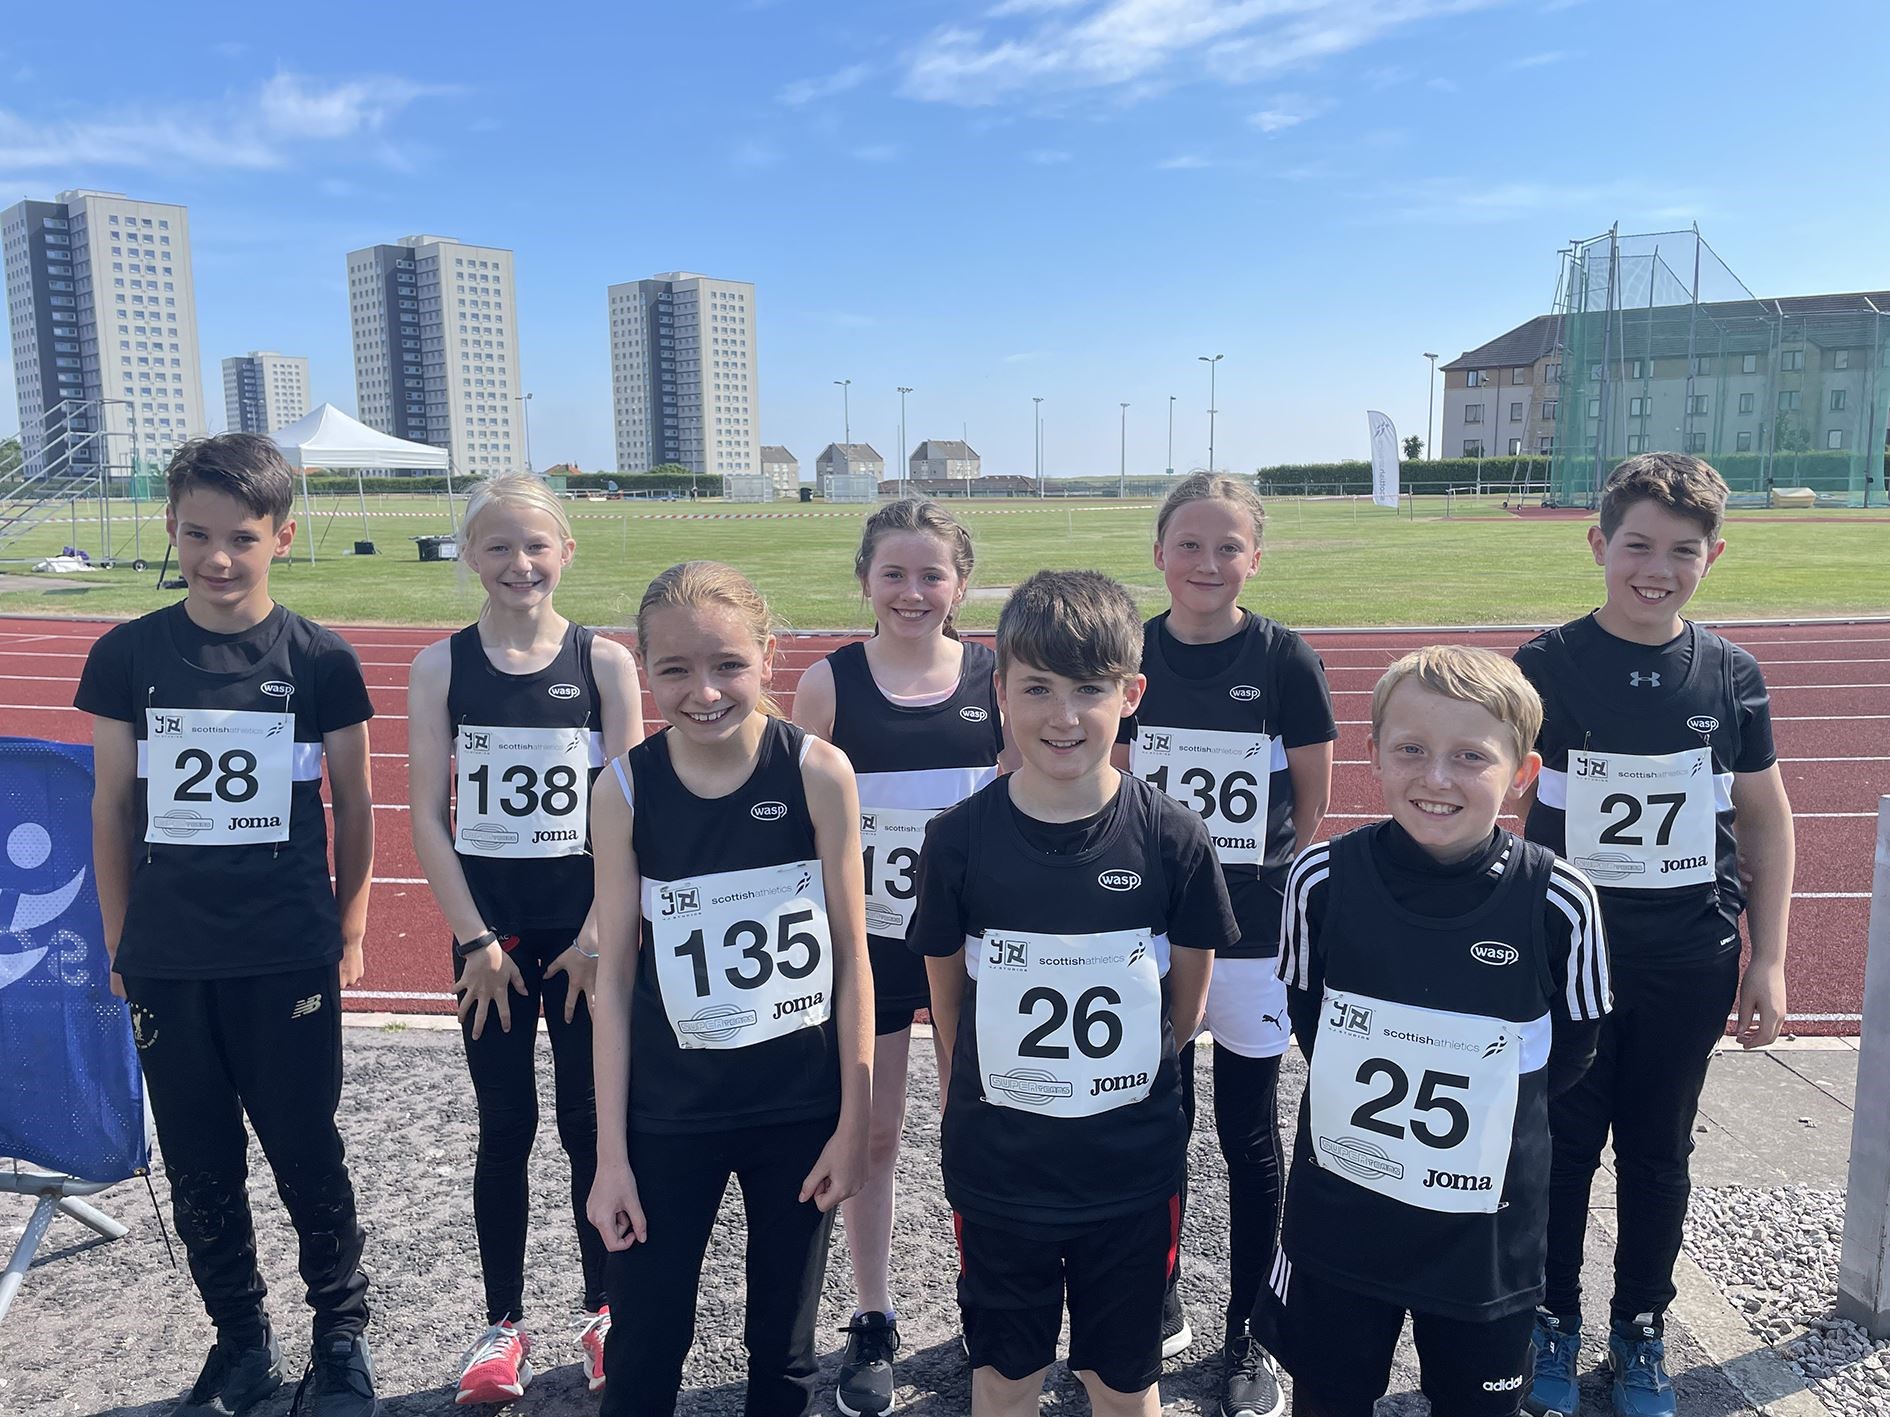 The Elgin AAC athletes who excelled in Aberdeen: Leo Grant (28), Gemma Forgie (138), Brianna Allen (137), Sophie Nelson (136), Cameron Johnston (27), Jenna Gage (135), Dexter Flett (26) and Charlie Collins (25).